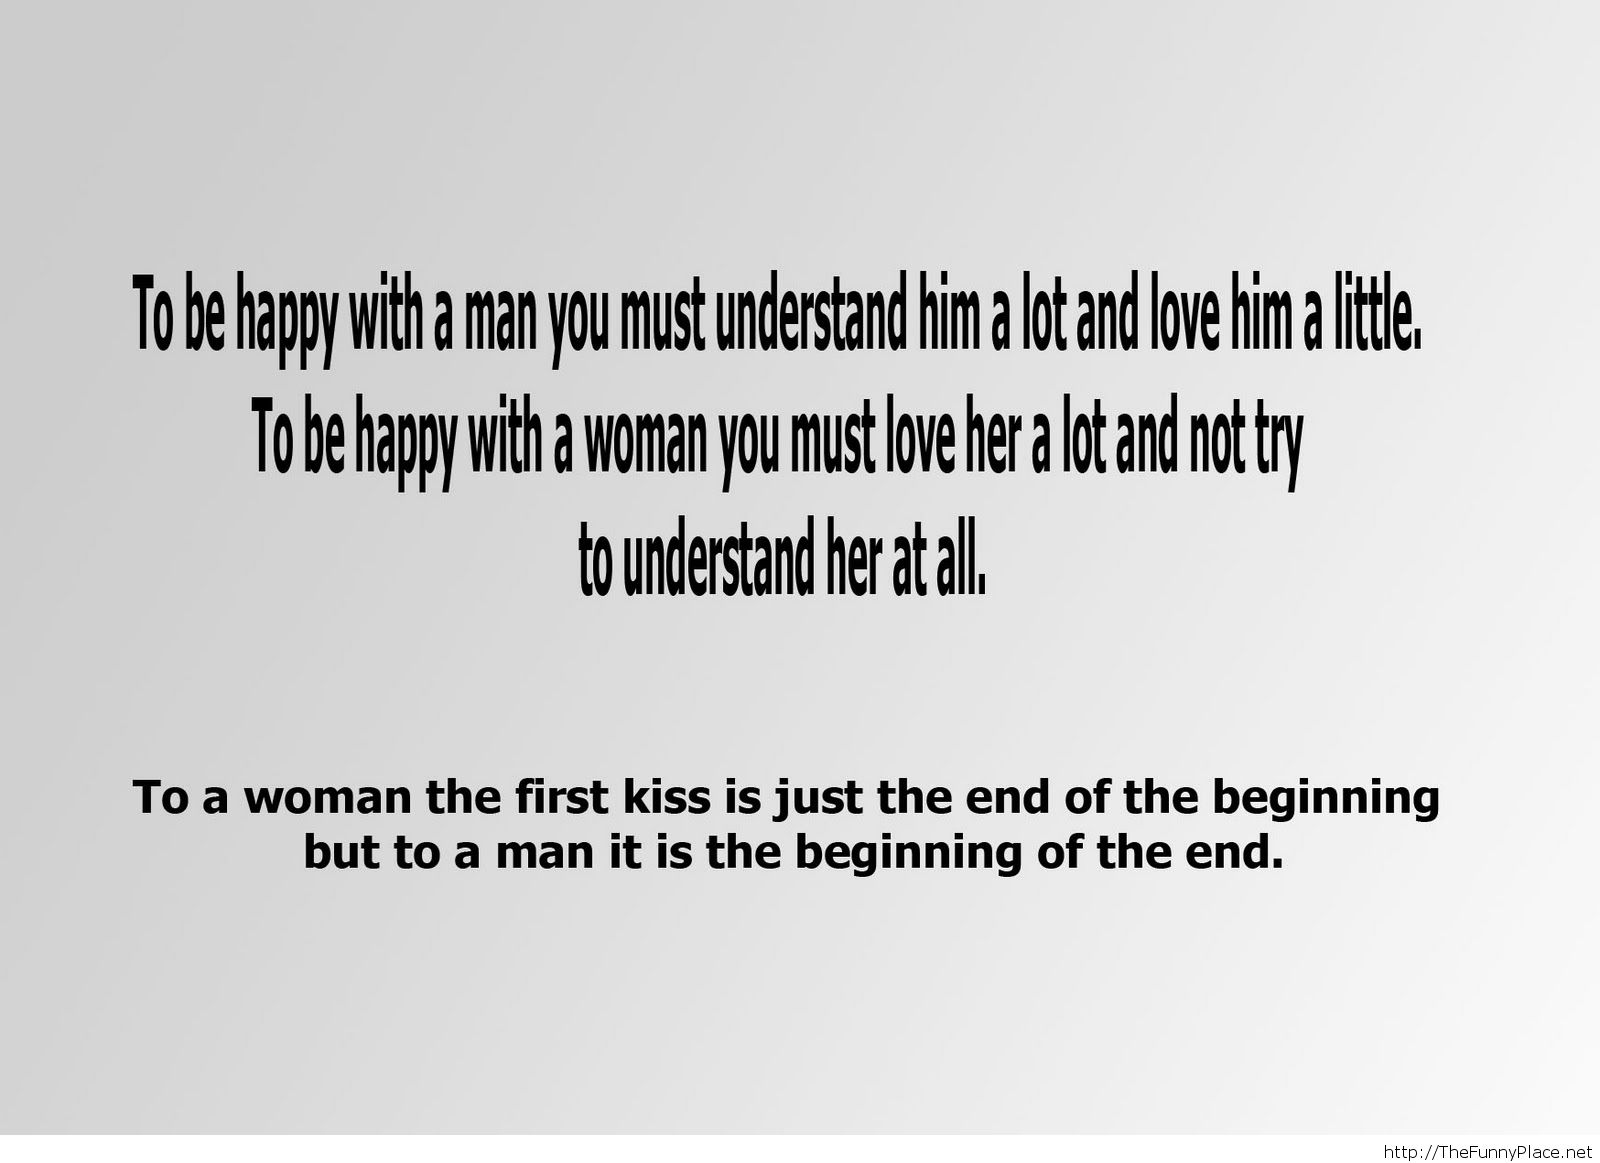 Quote About the Difference Between a Man and a Woman